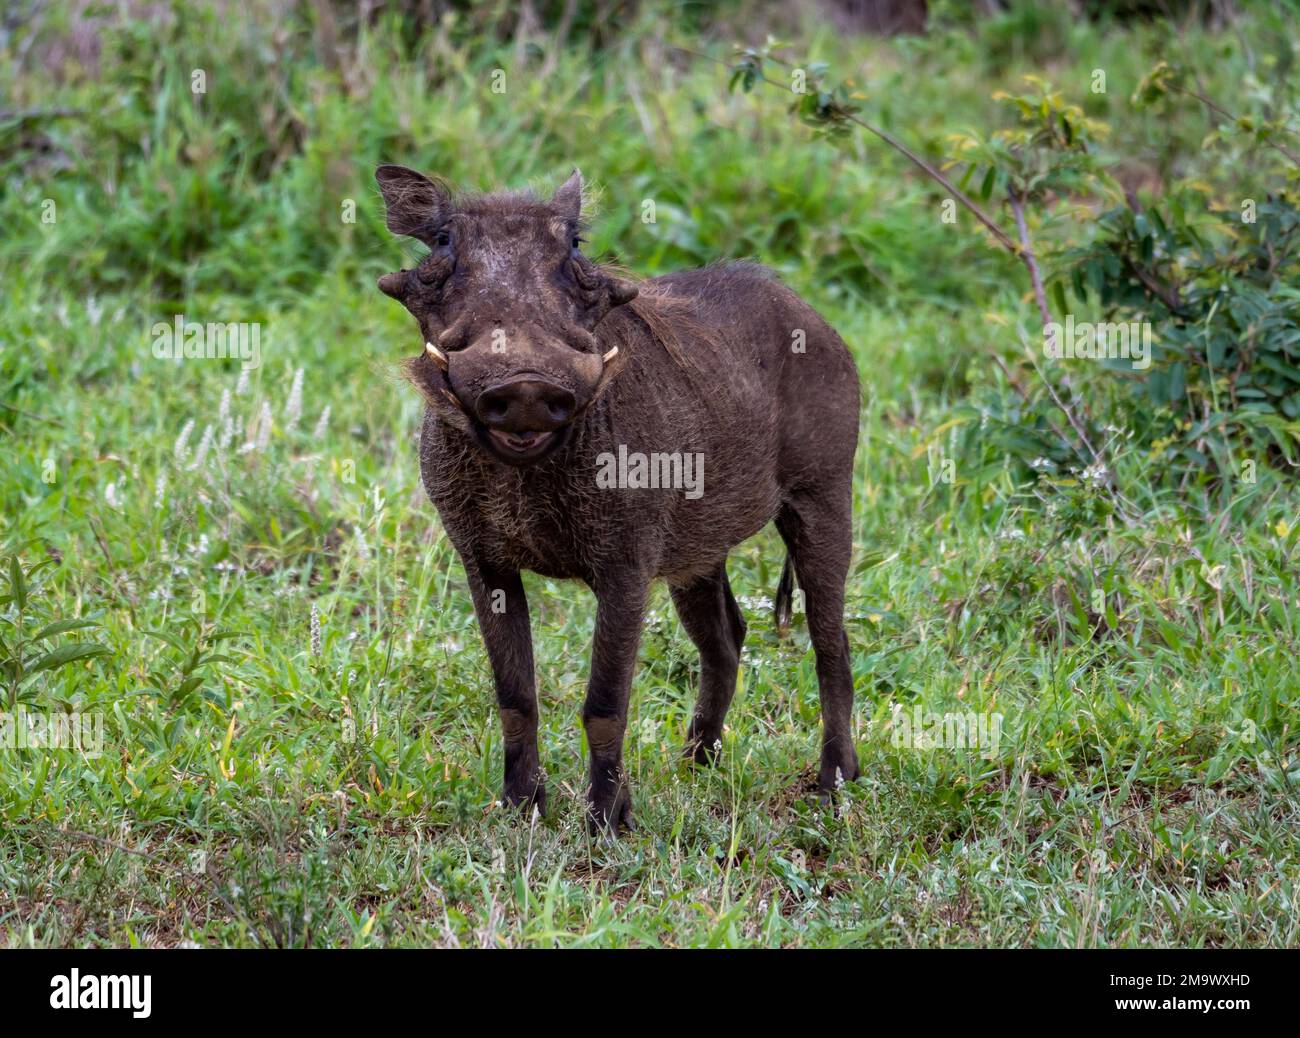 A Common Warthog (Phacochoerus africanus) standing on grass. Kruger National Park, South Africa. Stock Photo